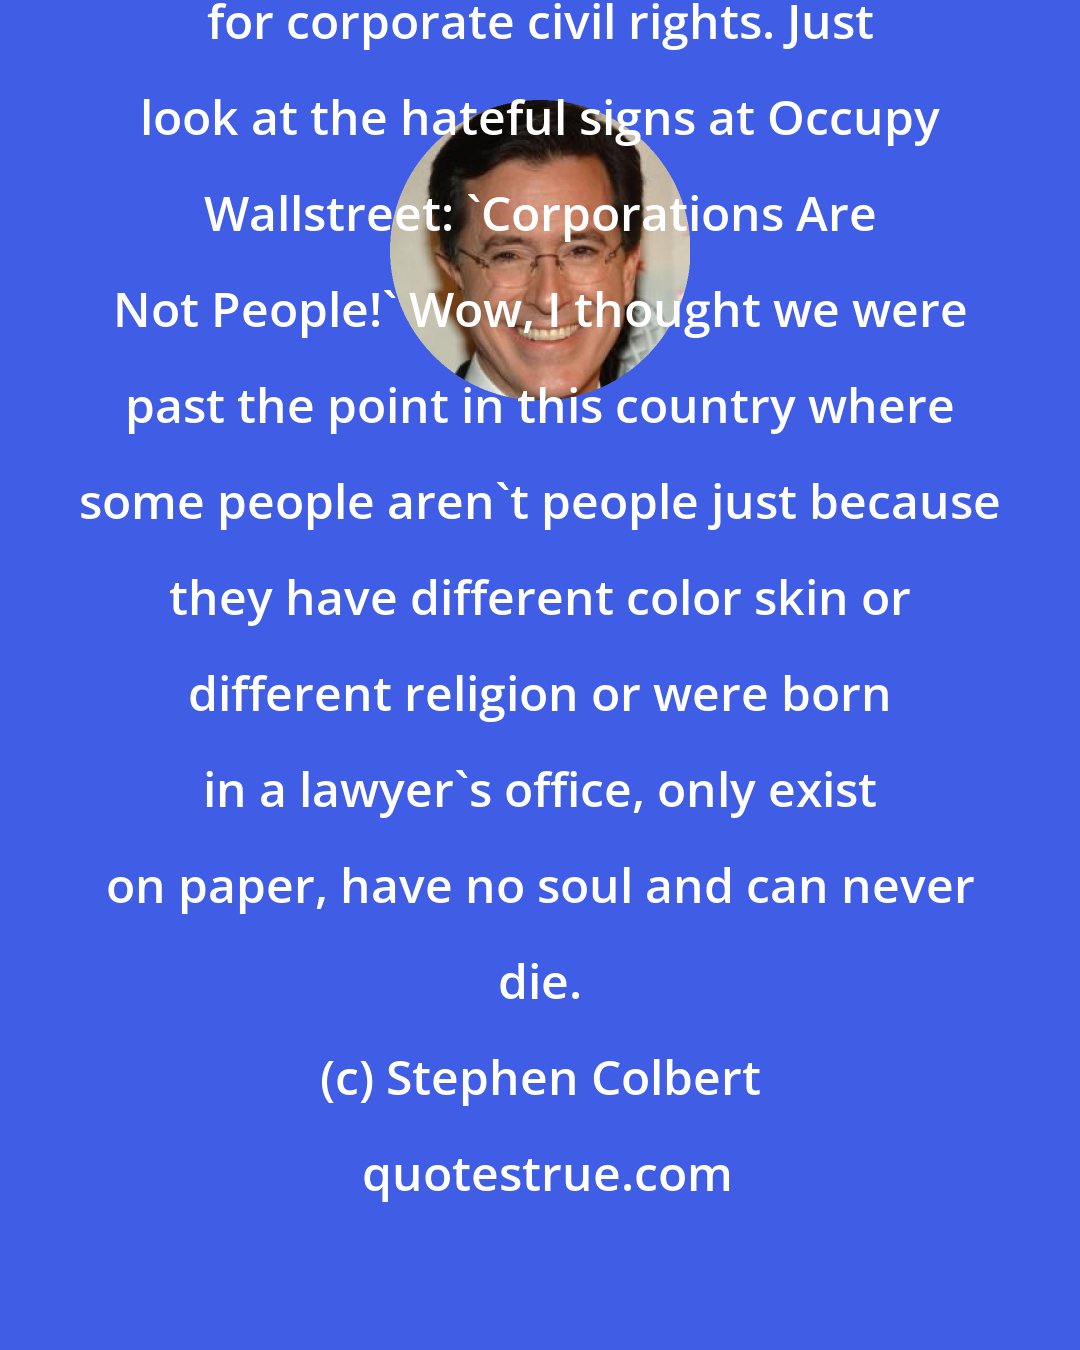 Stephen Colbert: This is a crucial time in the fight for corporate civil rights. Just look at the hateful signs at Occupy Wallstreet: 'Corporations Are Not People!' Wow, I thought we were past the point in this country where some people aren't people just because they have different color skin or different religion or were born in a lawyer's office, only exist on paper, have no soul and can never die.